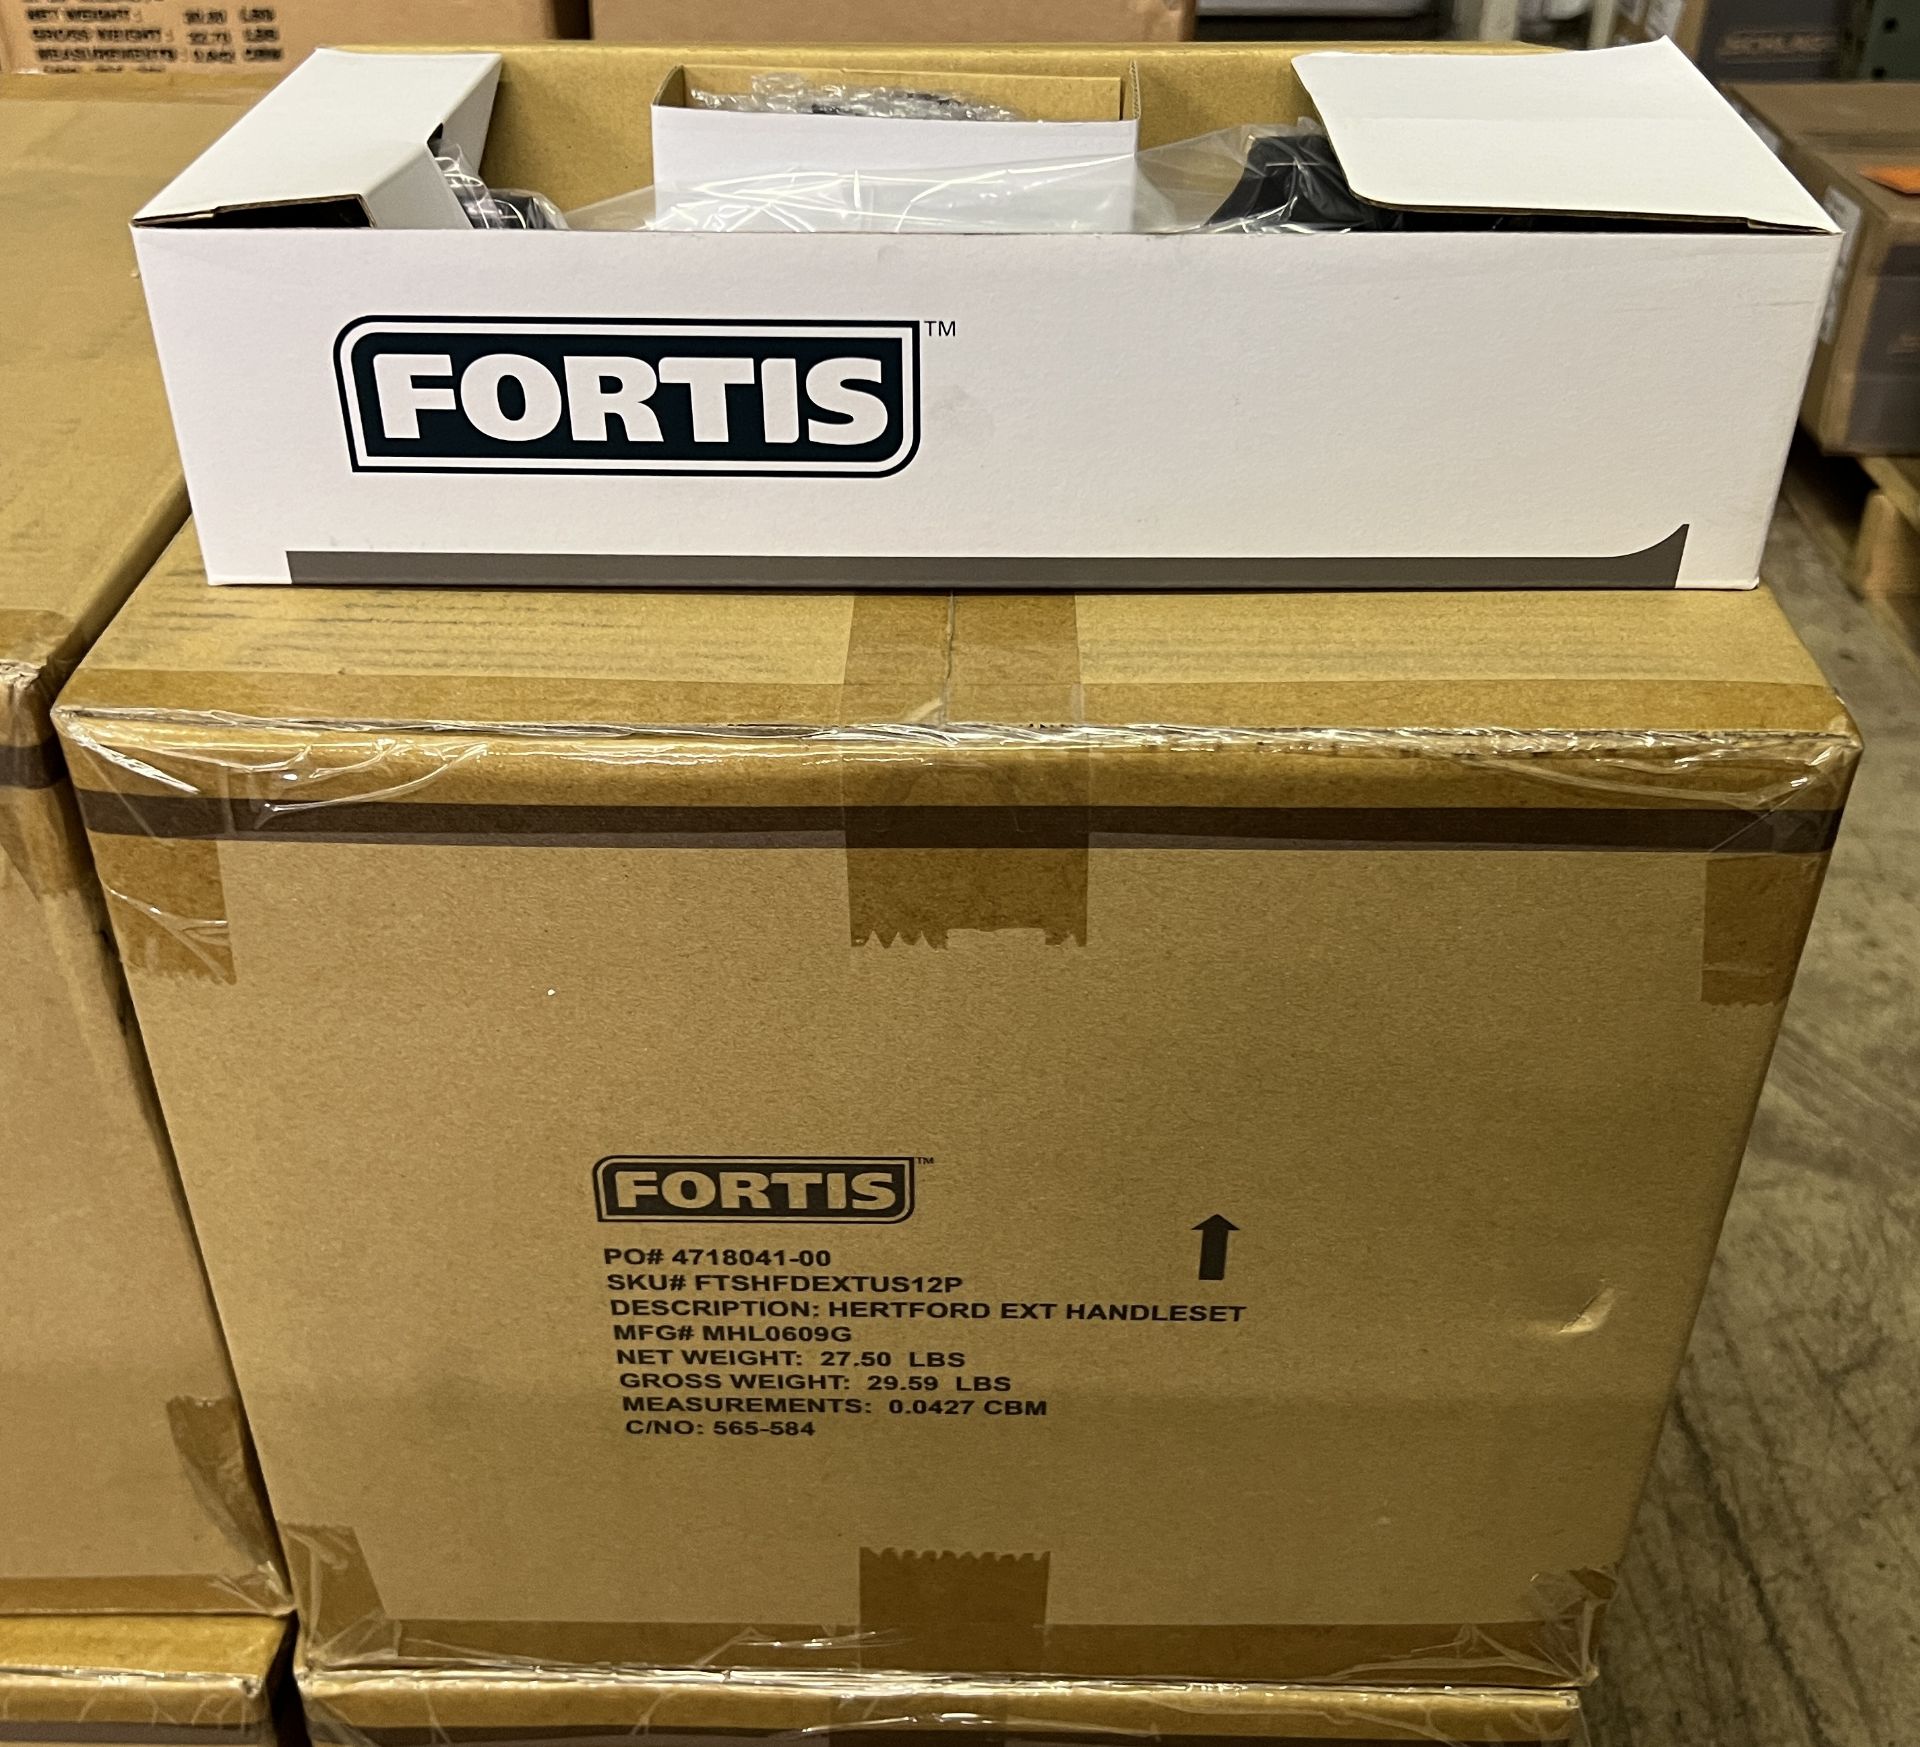 (10) FORTIS HERTFORD EXT HANDLESET US12P OIL RUBBED BRONZE